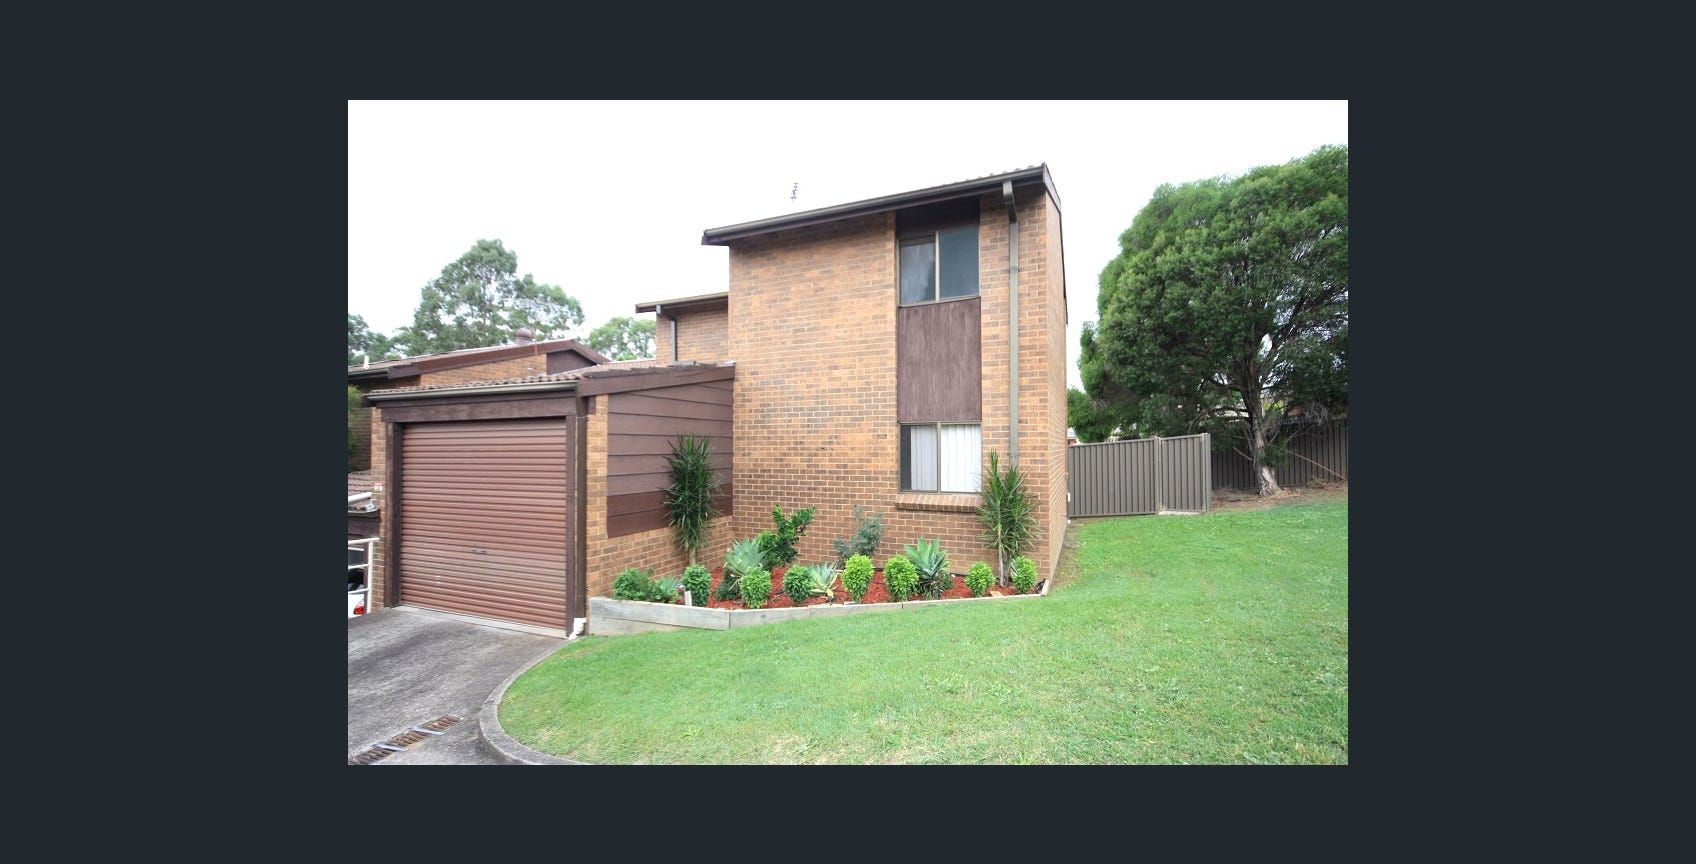 2 bedrooms House in 10/50 Victoria Road MACQUARIE FIELDS NSW, 2564